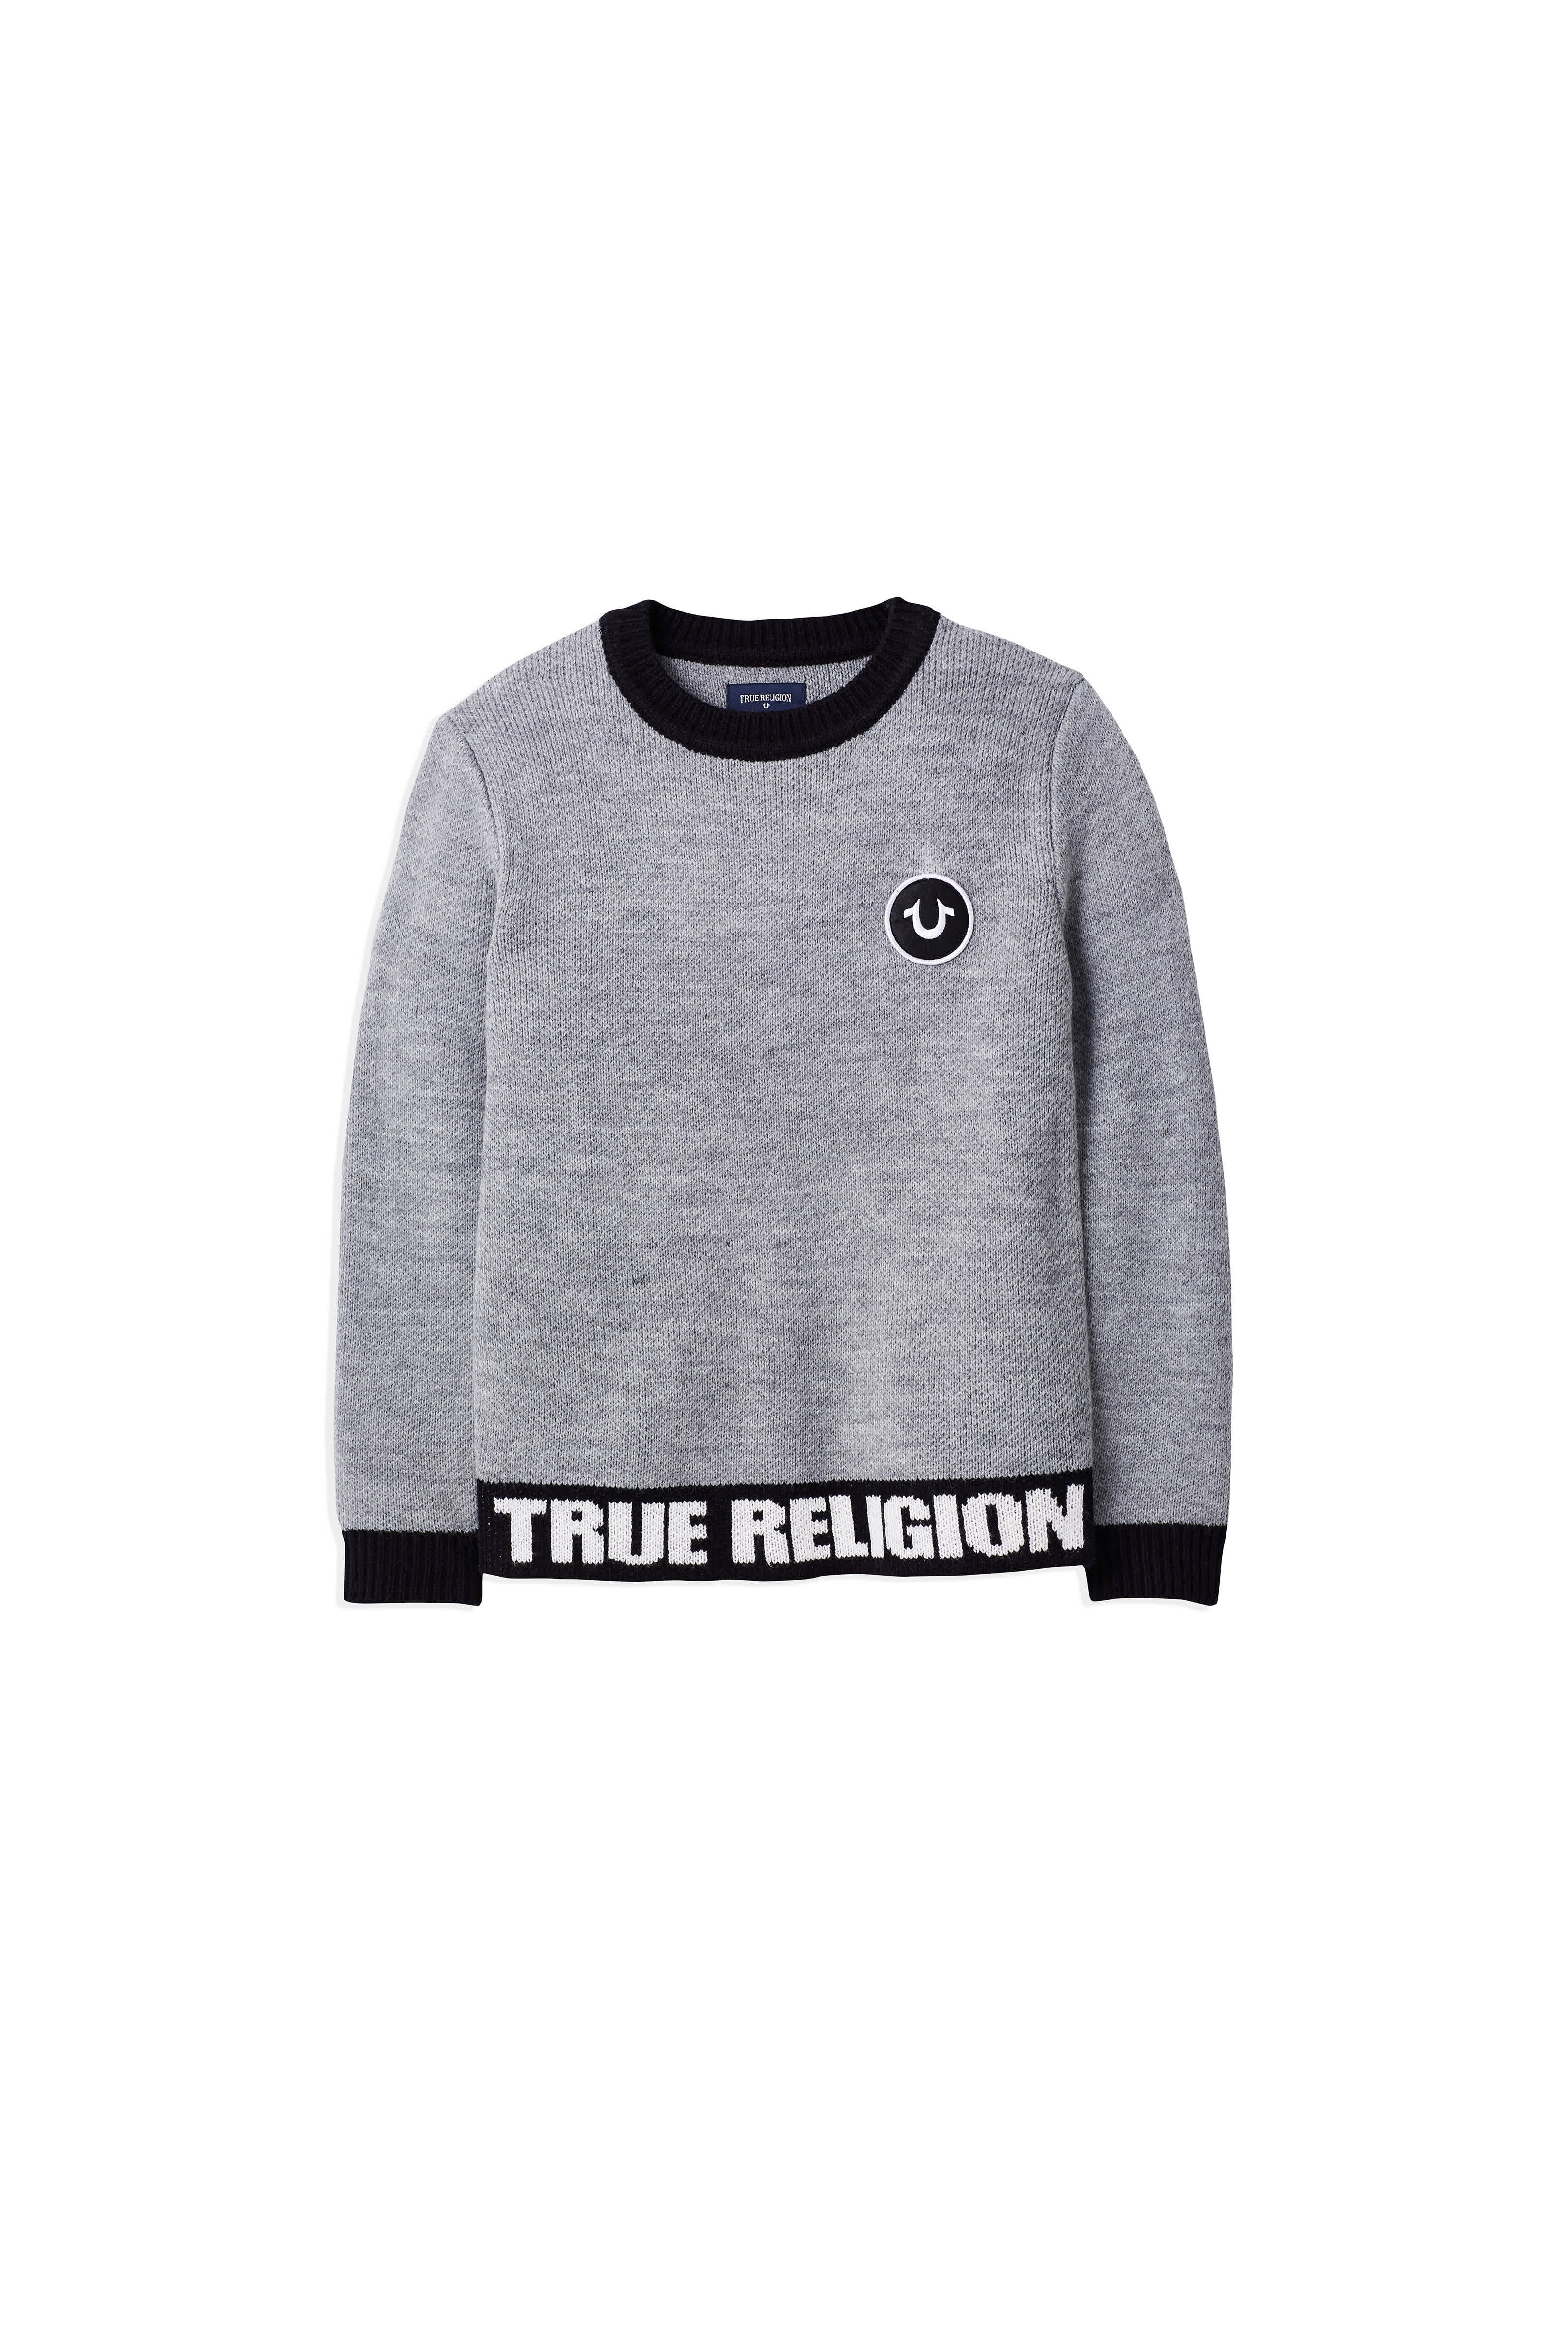 TR PULLOVER KIDS SWEATER